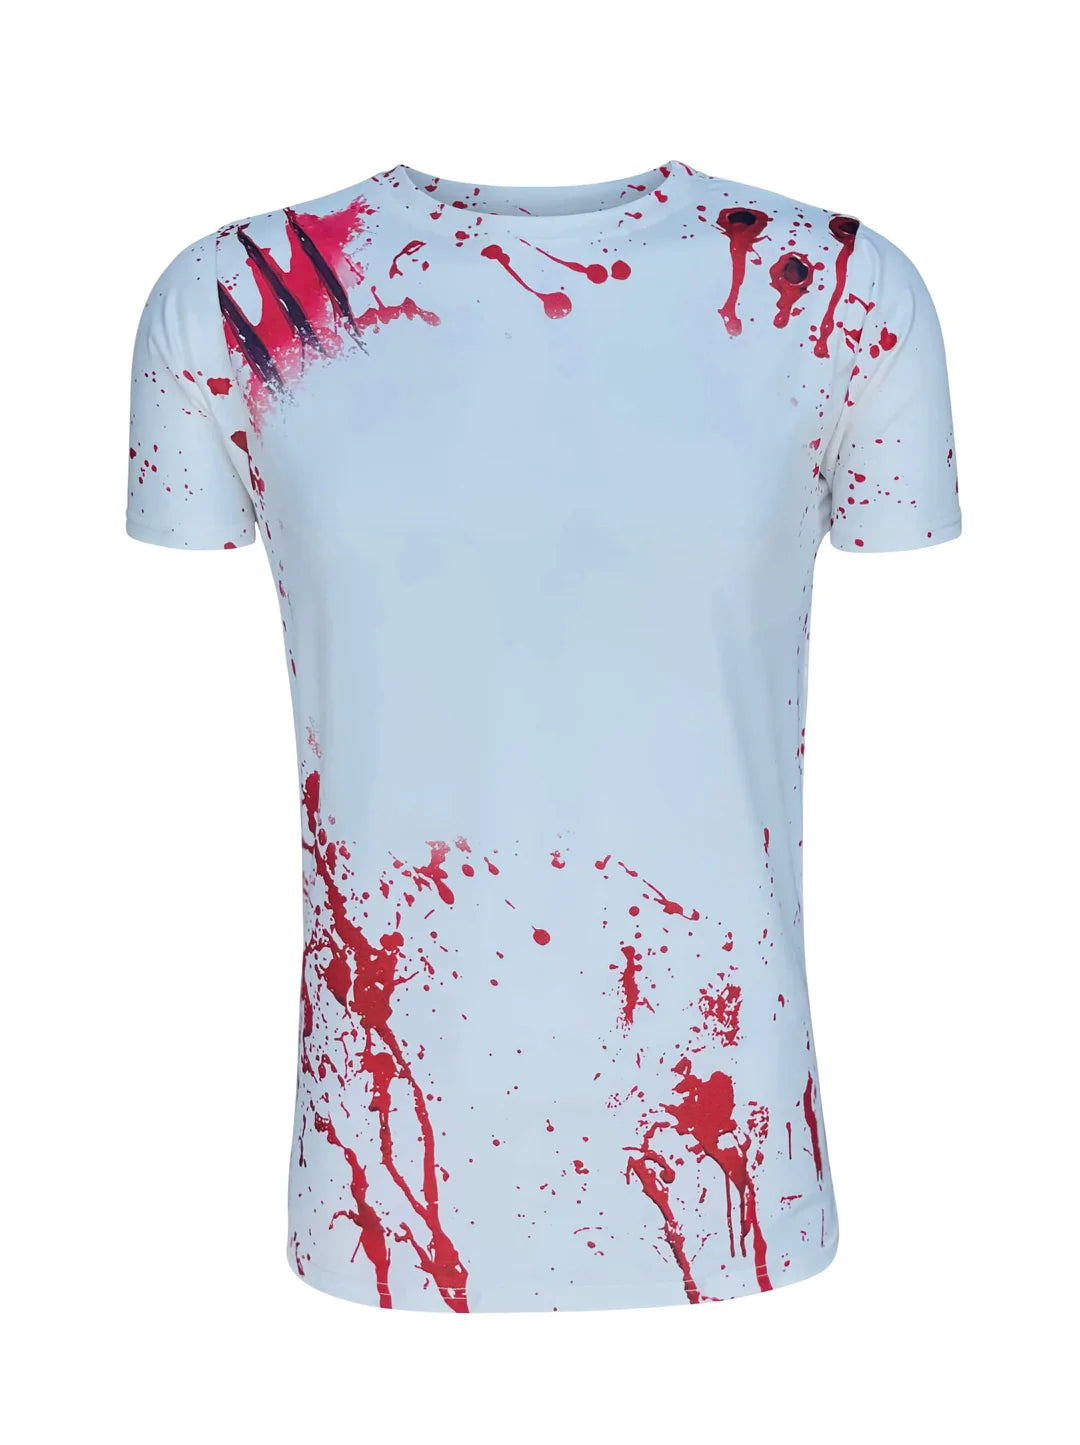 Unisex Faux Halloween Bleached Shirts, ready for Sublimation LIMITED QUANTITY